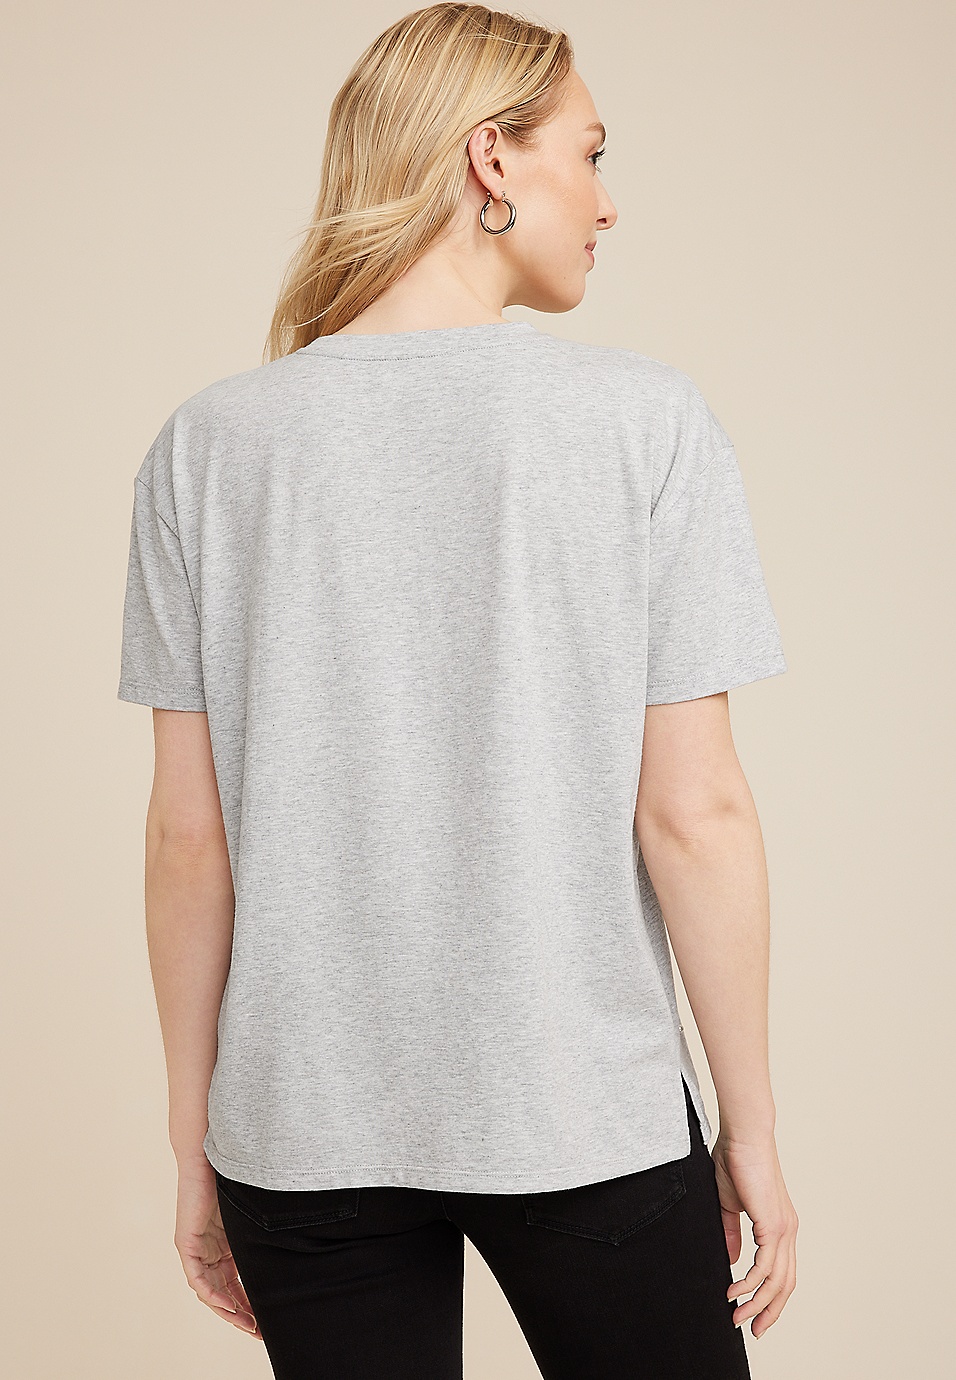 edgely™ Pearl Embellished Crew Neck Tee | maurices | T-Shirts